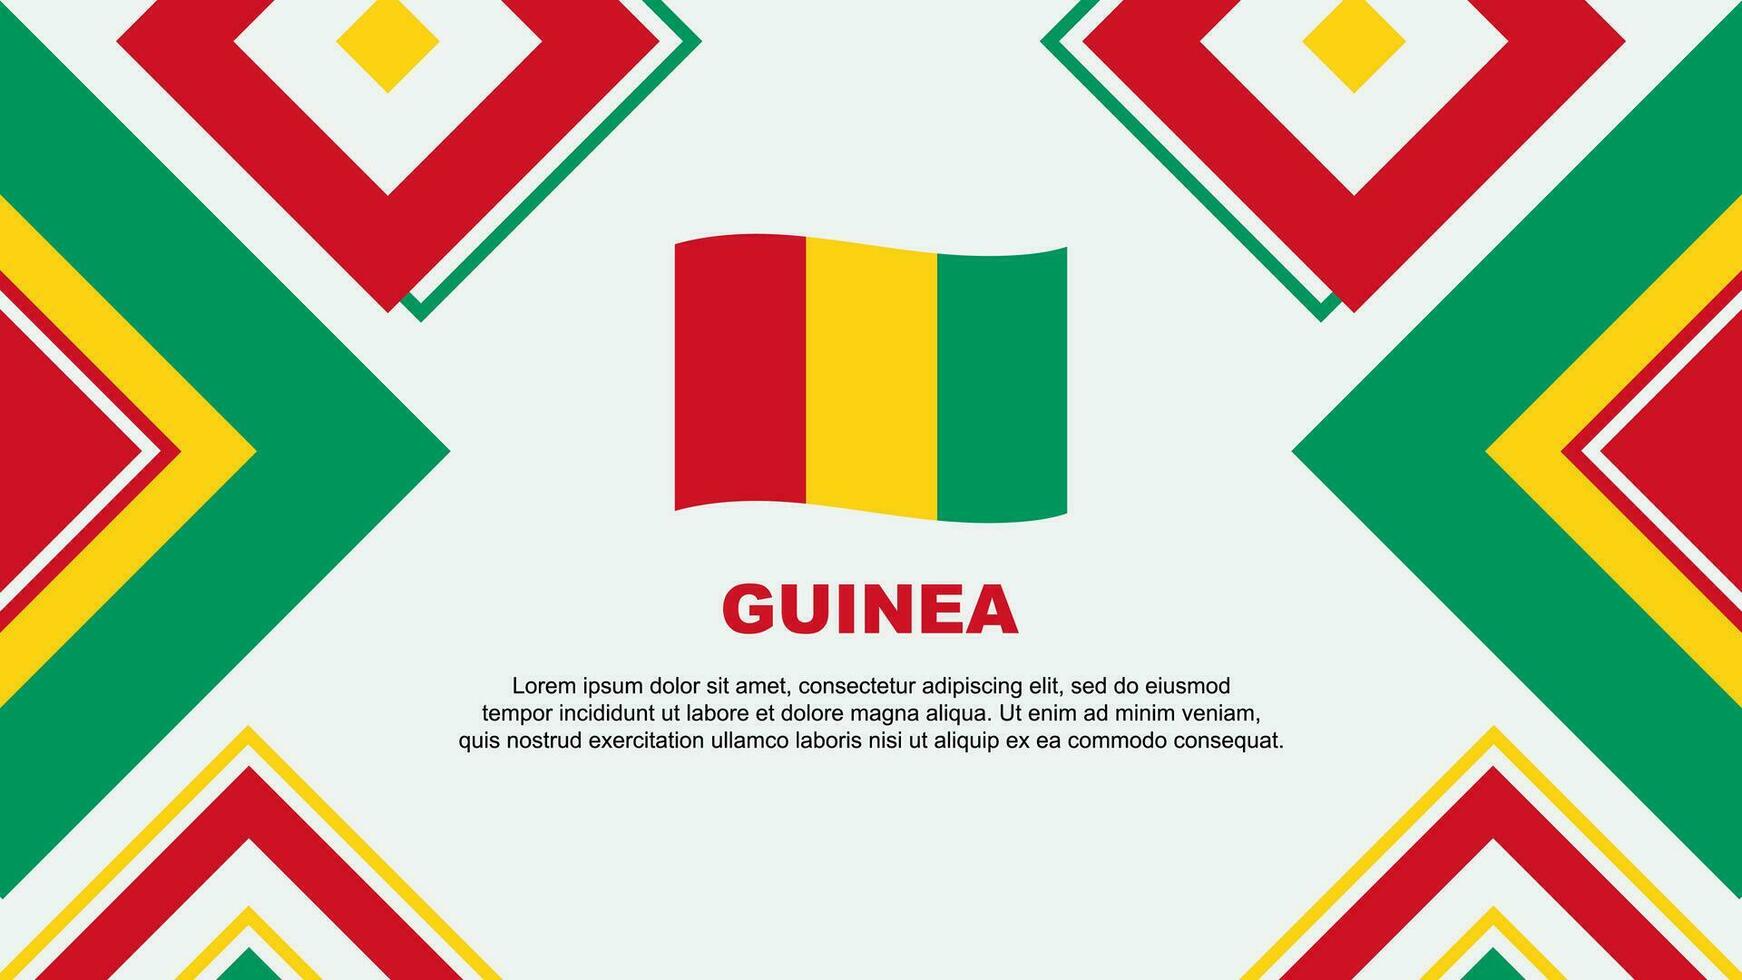 Guinea Flag Abstract Background Design Template. Guinea Independence Day Banner Wallpaper Vector Illustration. Guinea Independence Day